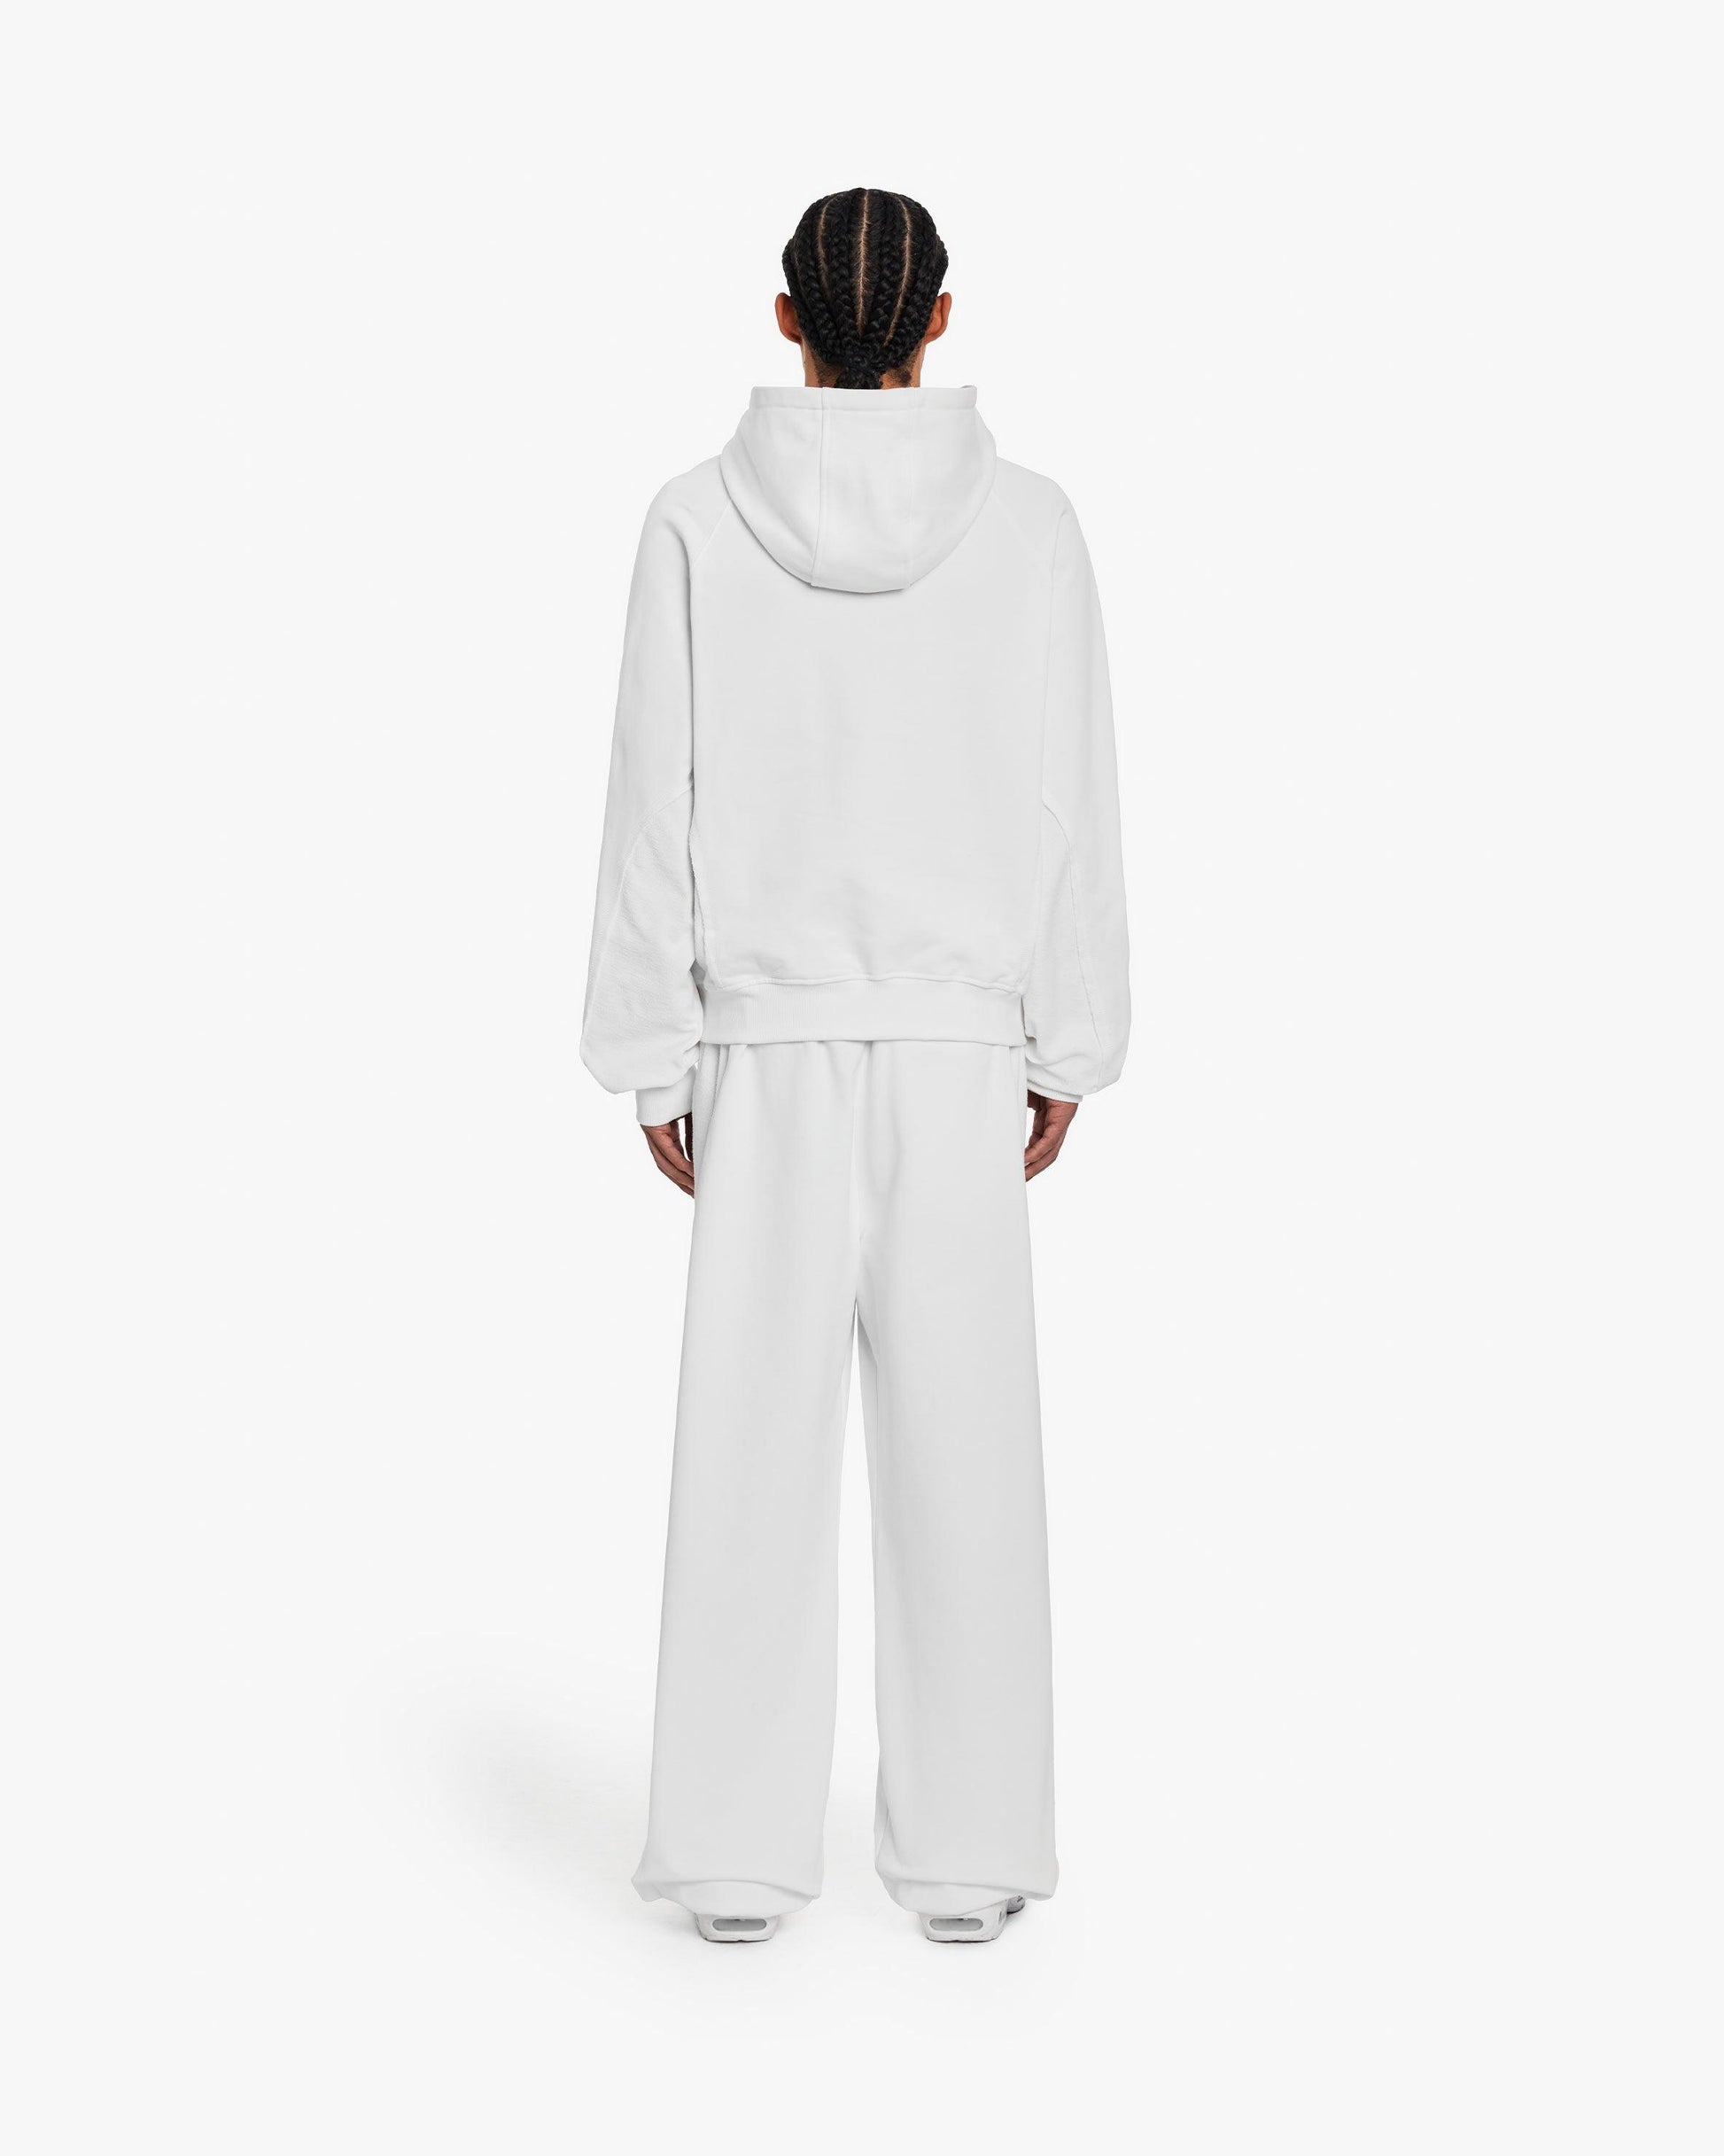 INSIDE OUT HOODIE WHITE - VICINITY